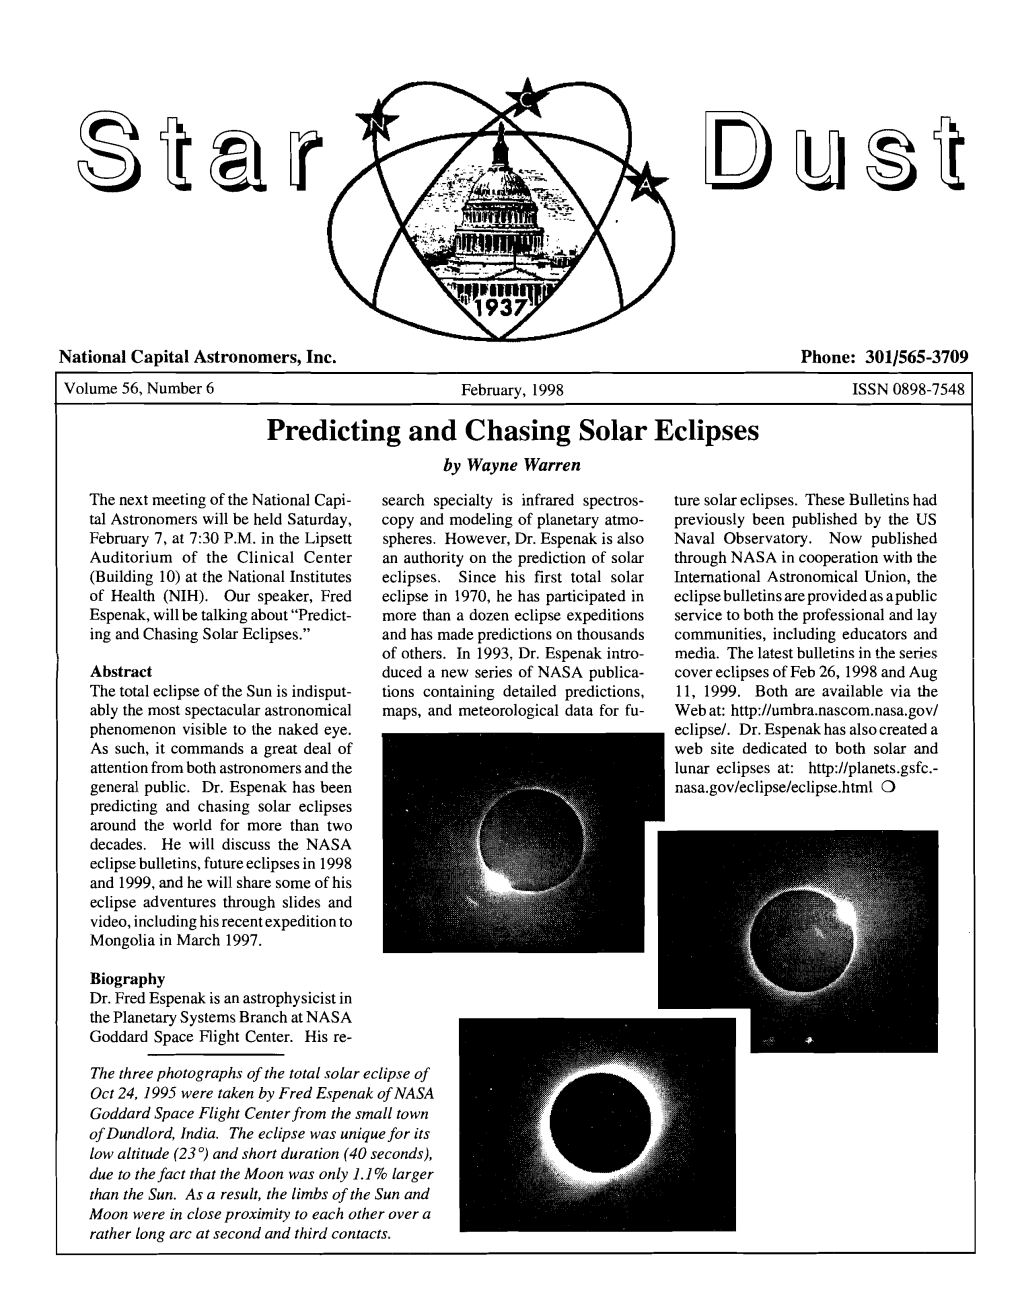 Predicting and Chasing Solar Eclipses by Wayne Warren